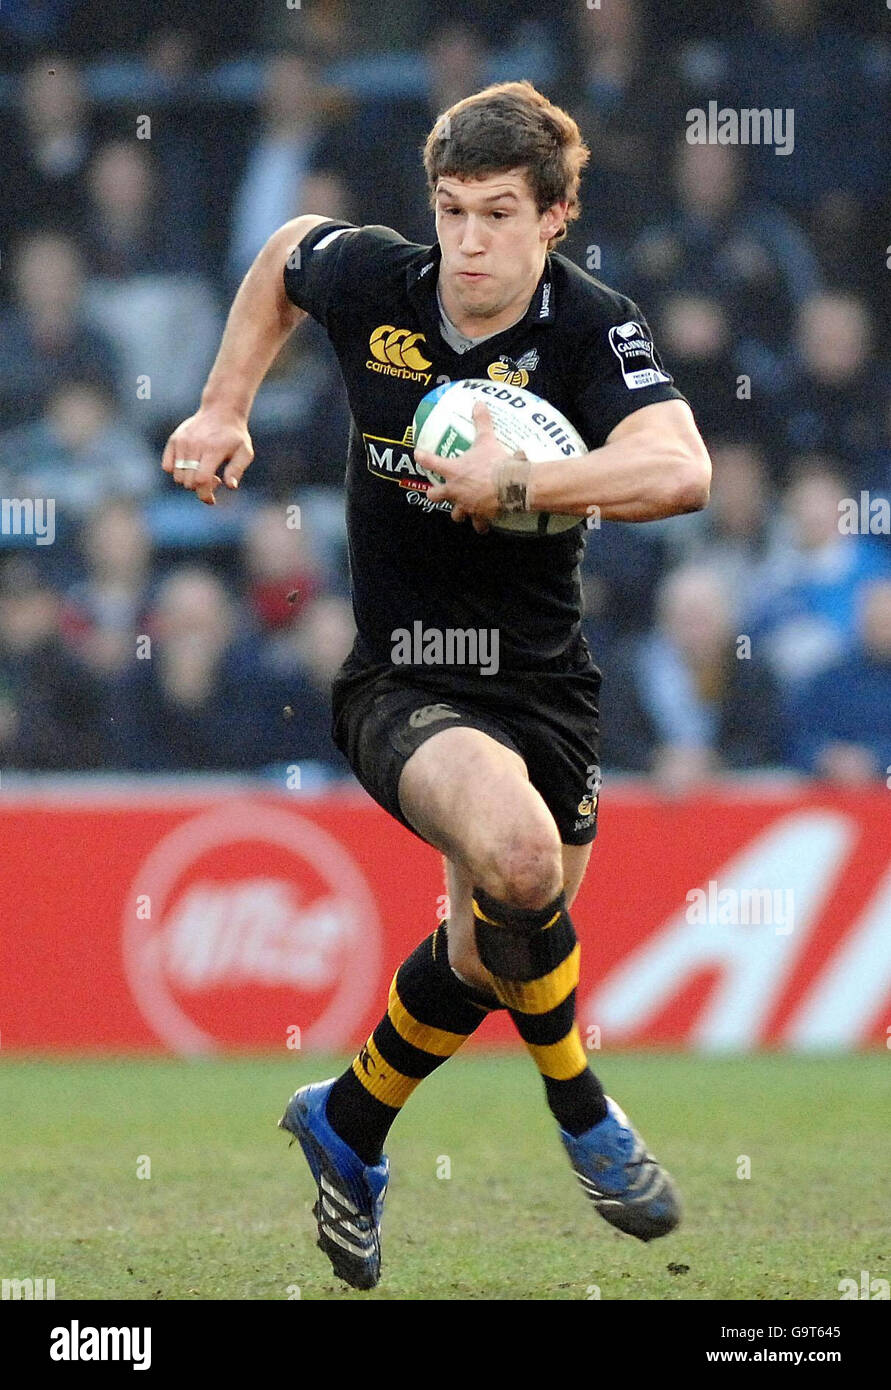 Rugby Union - European Cup - Wasps v Leinster. Wasps centre Dominic Waldouck (v Leinster European Cup 31-3-07) Stock Photo